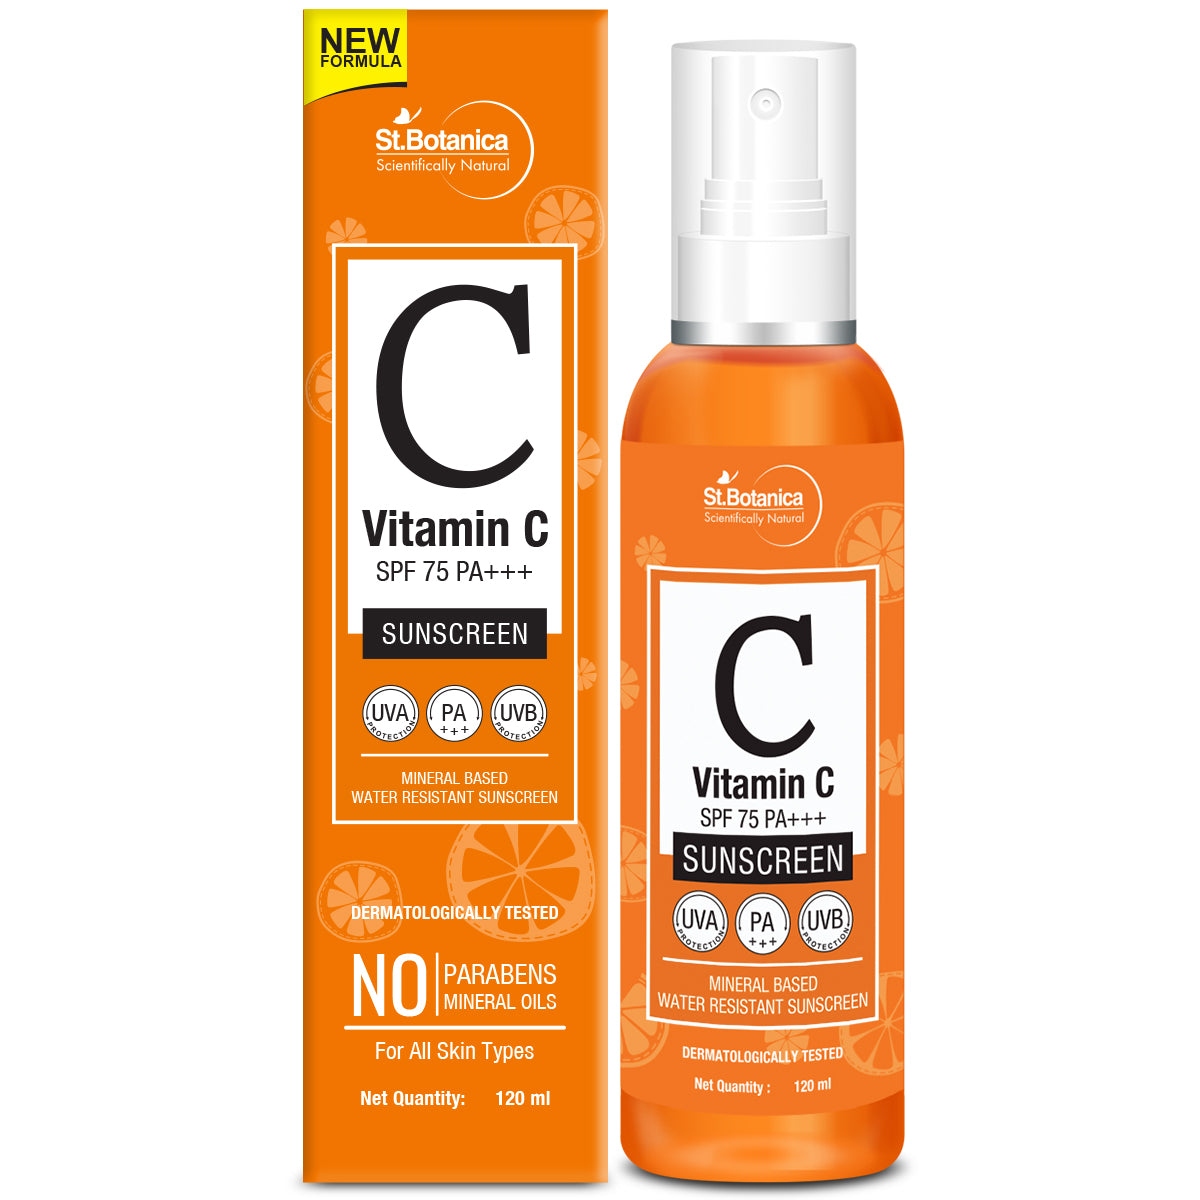 St.Botanica Vitamin C SPF 75 Dry Touch Sunscreen Lotion UVA/UVB Pa+++ - Mineral Based and Water Resistant, 120 ml (STBOT586)